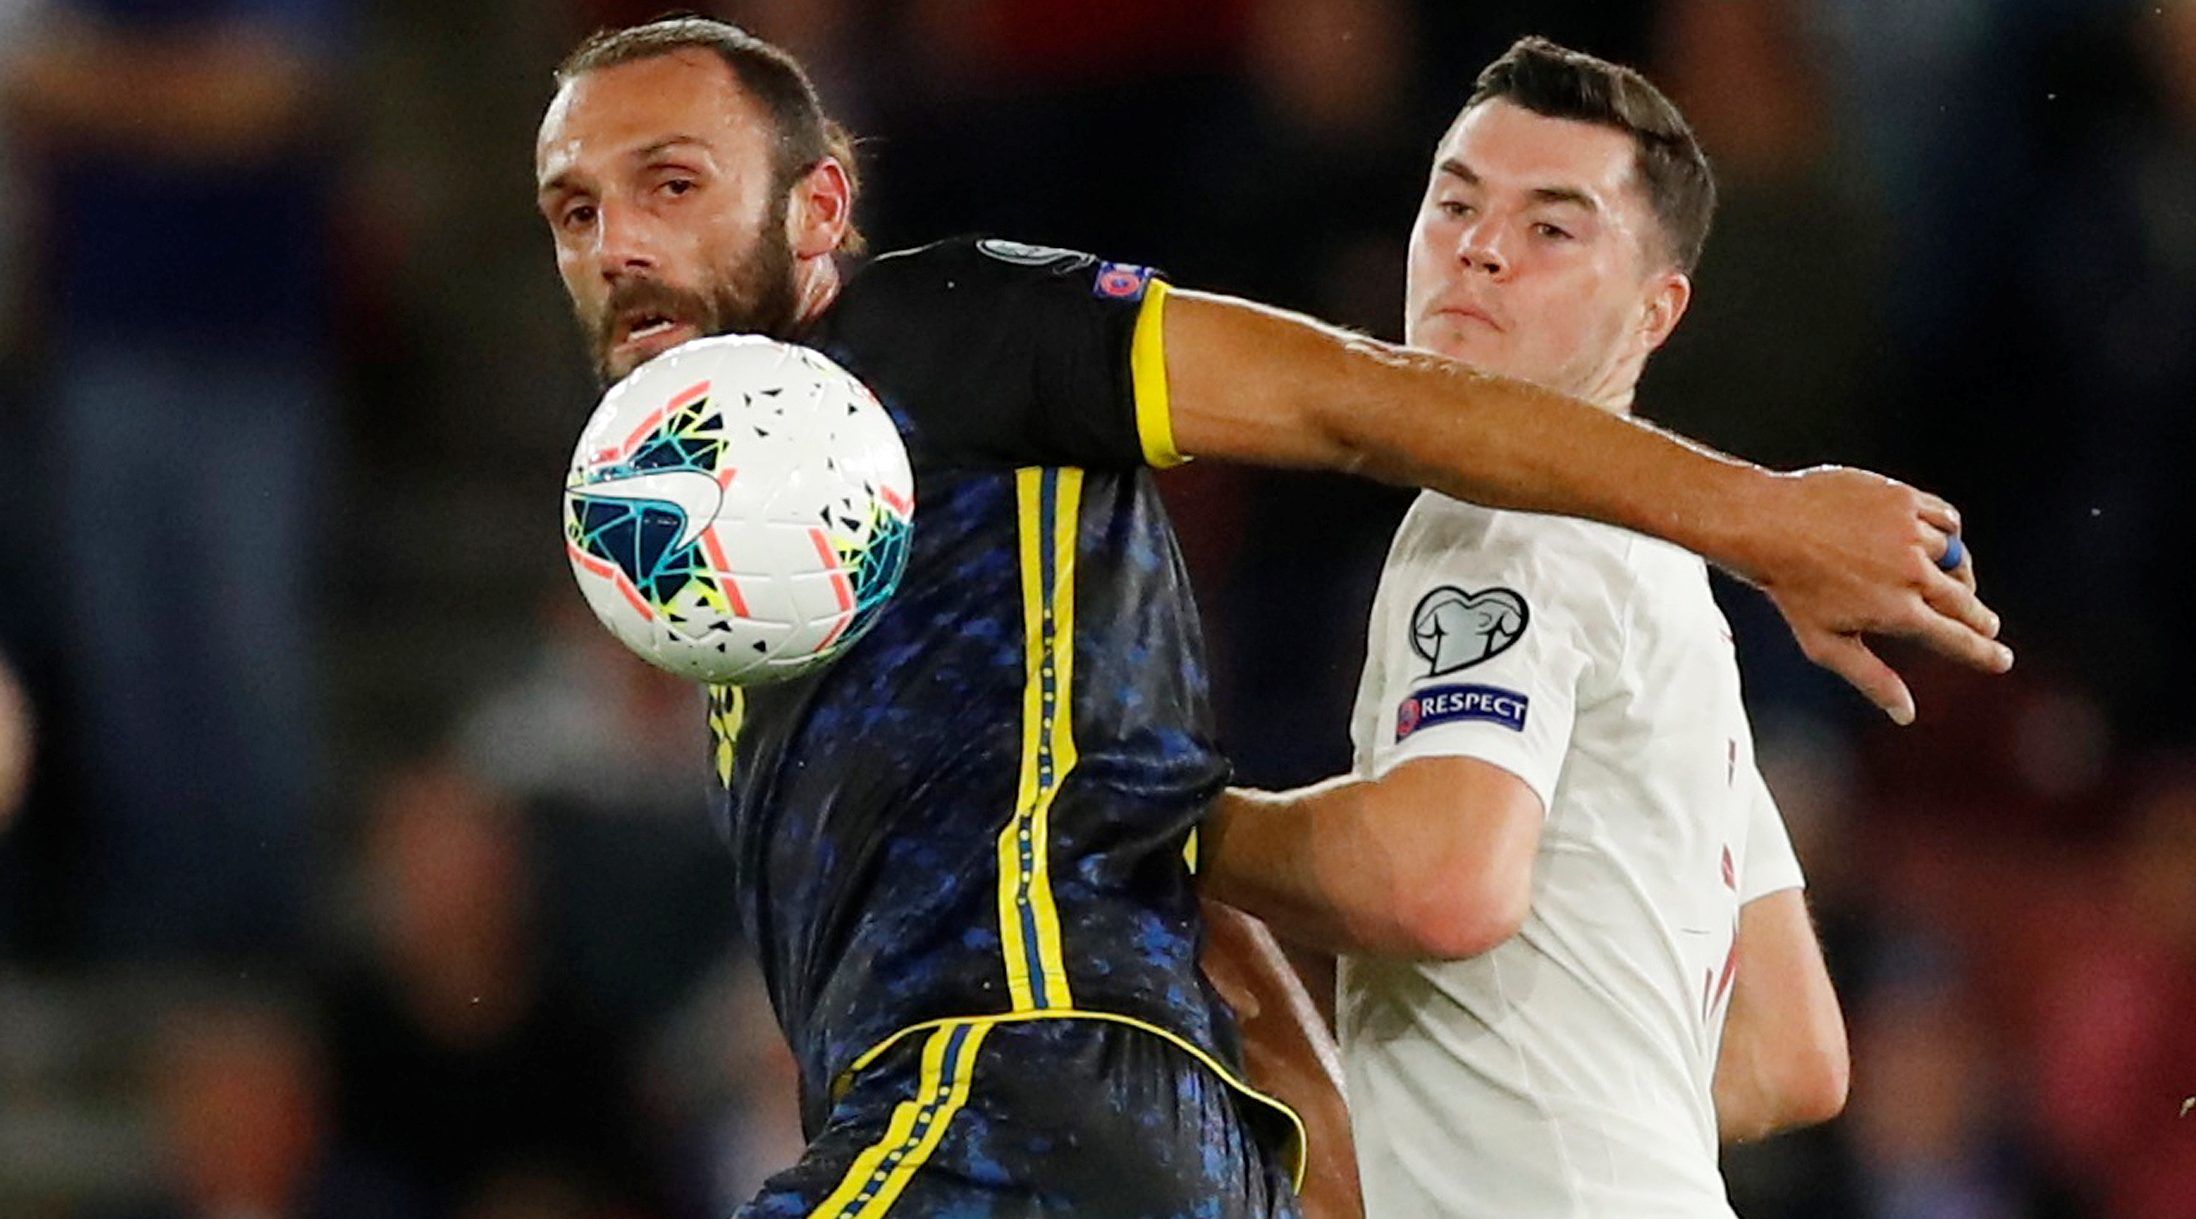 Soccer Football - Euro 2020 Qualifier - Group A - England v Kosovo - St Mary's Stadium, Southampton, Britain - September 10, 2019  Kosovo's Vedat Muriqi in action with England's Michael Keane   Action Images via Reuters/Andrew Boyers